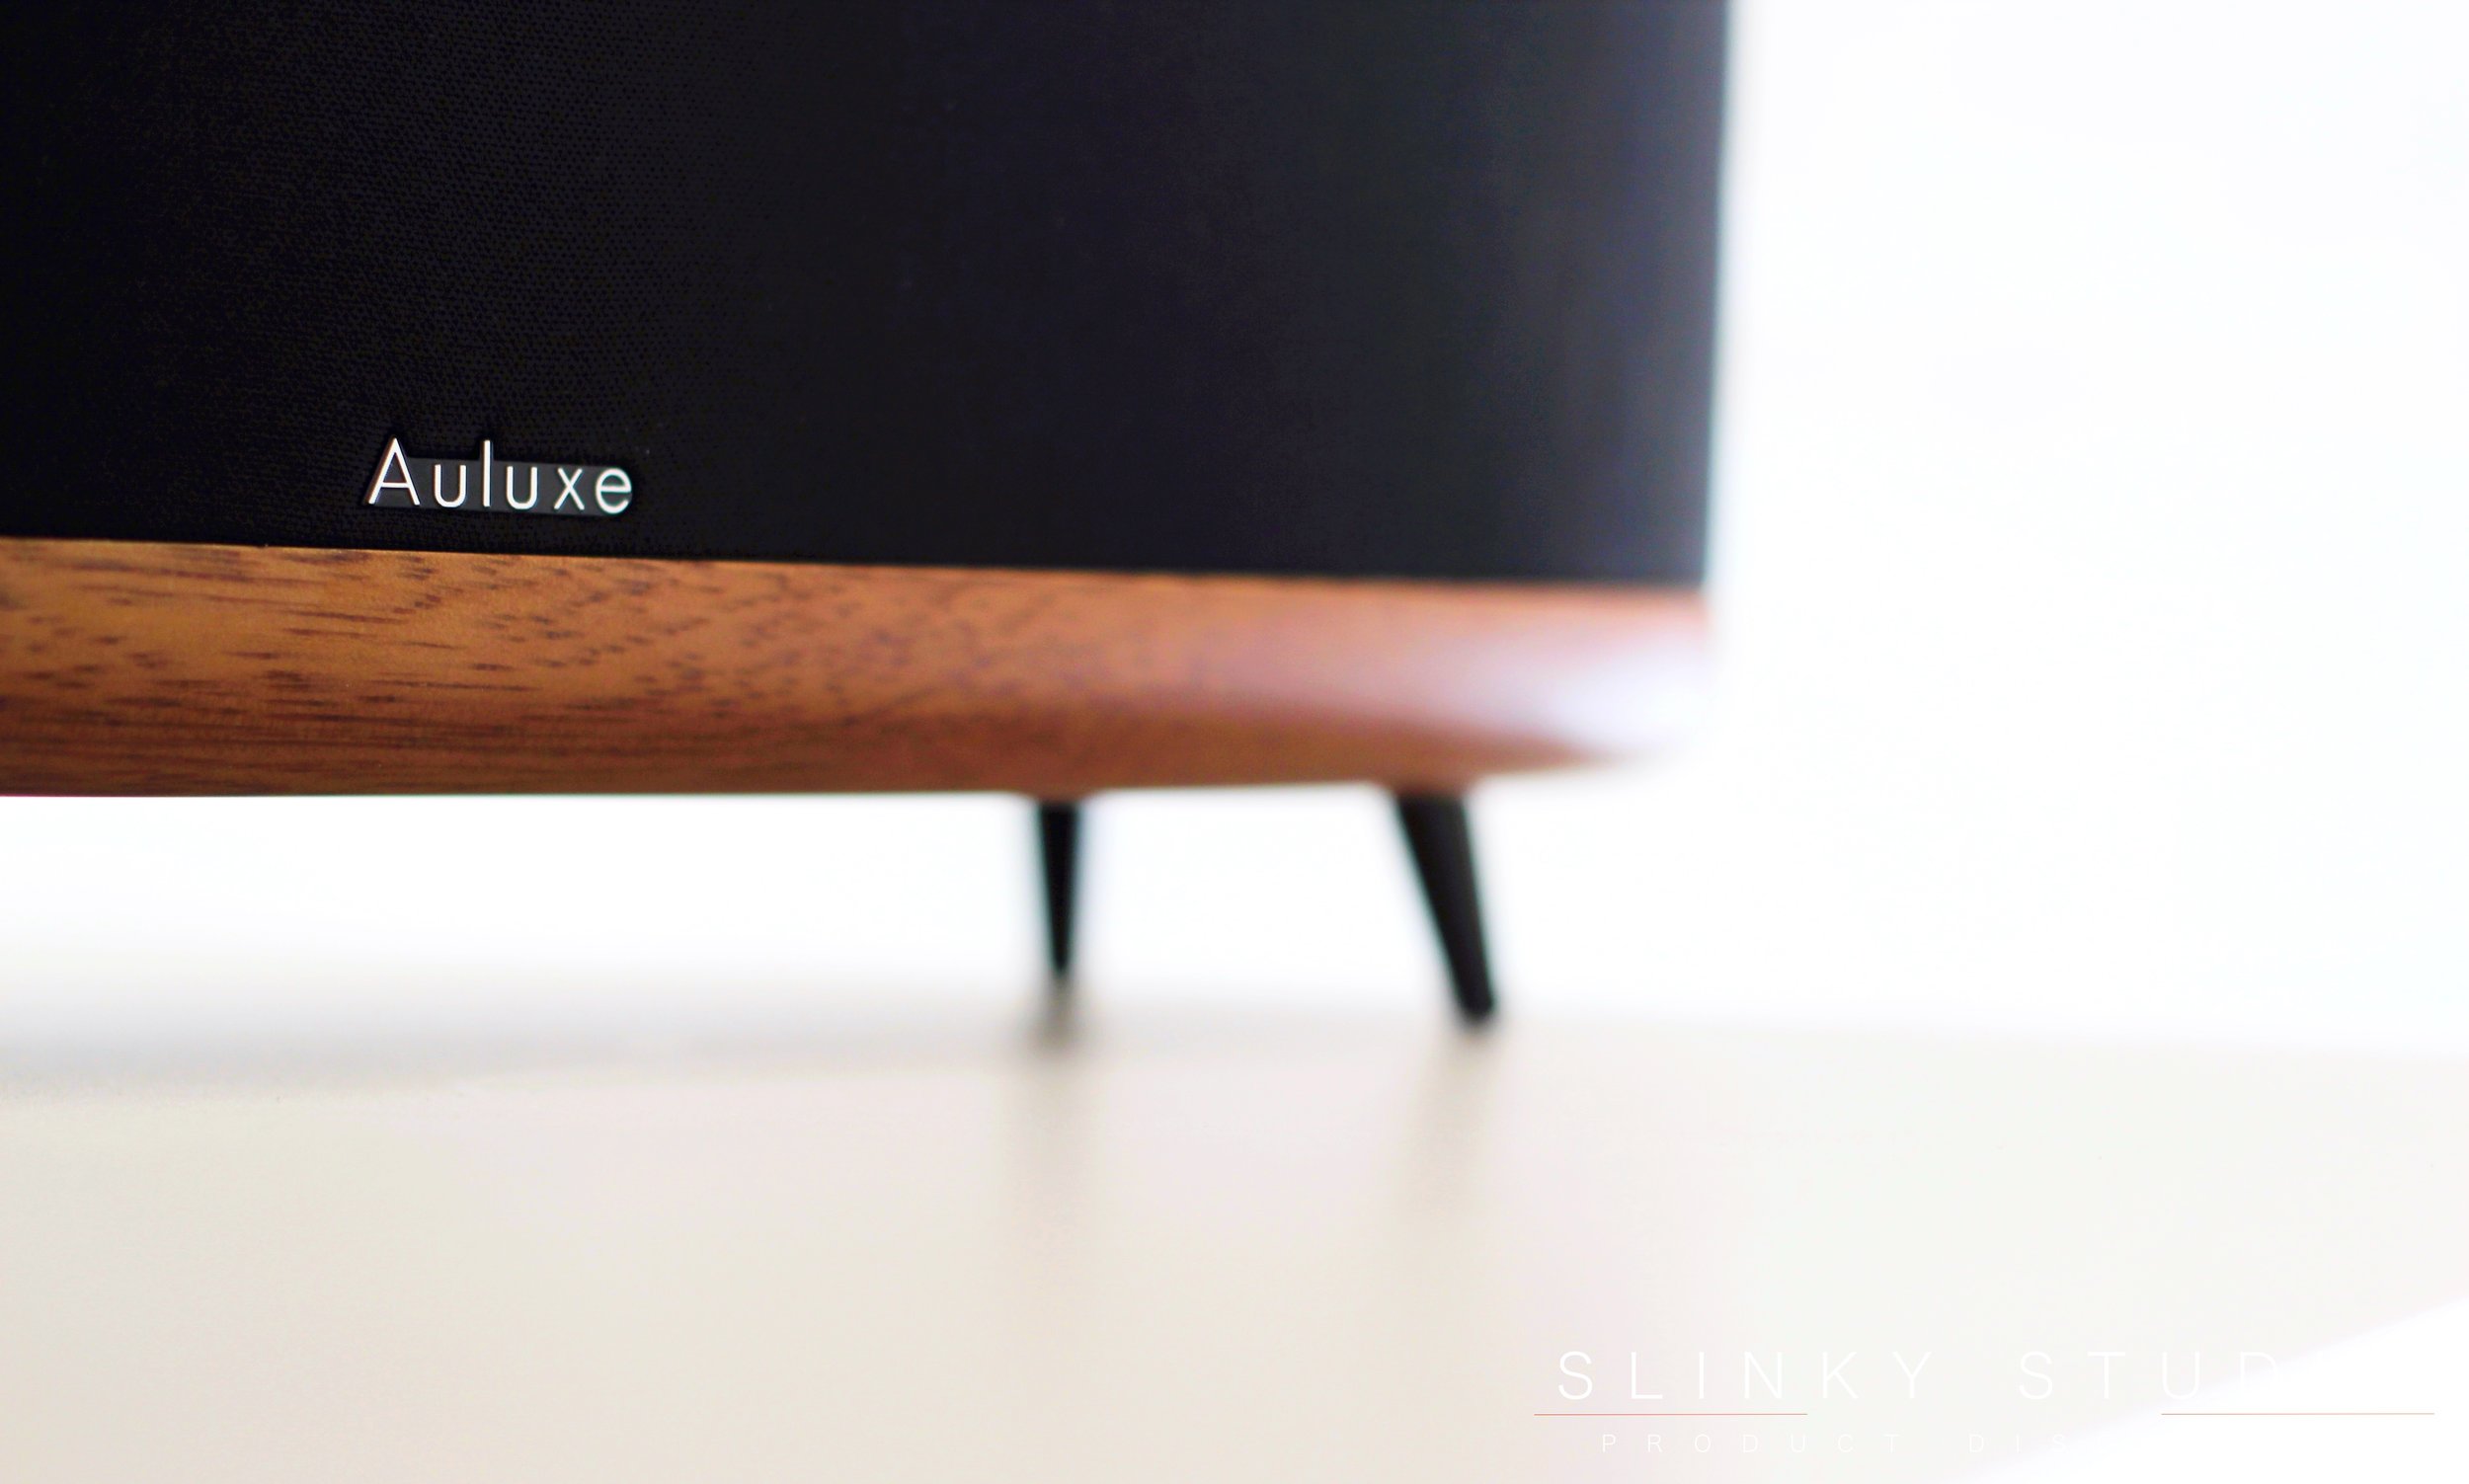 Auluxe Wave E3 Speaker Close Up Wooden Base.jpg